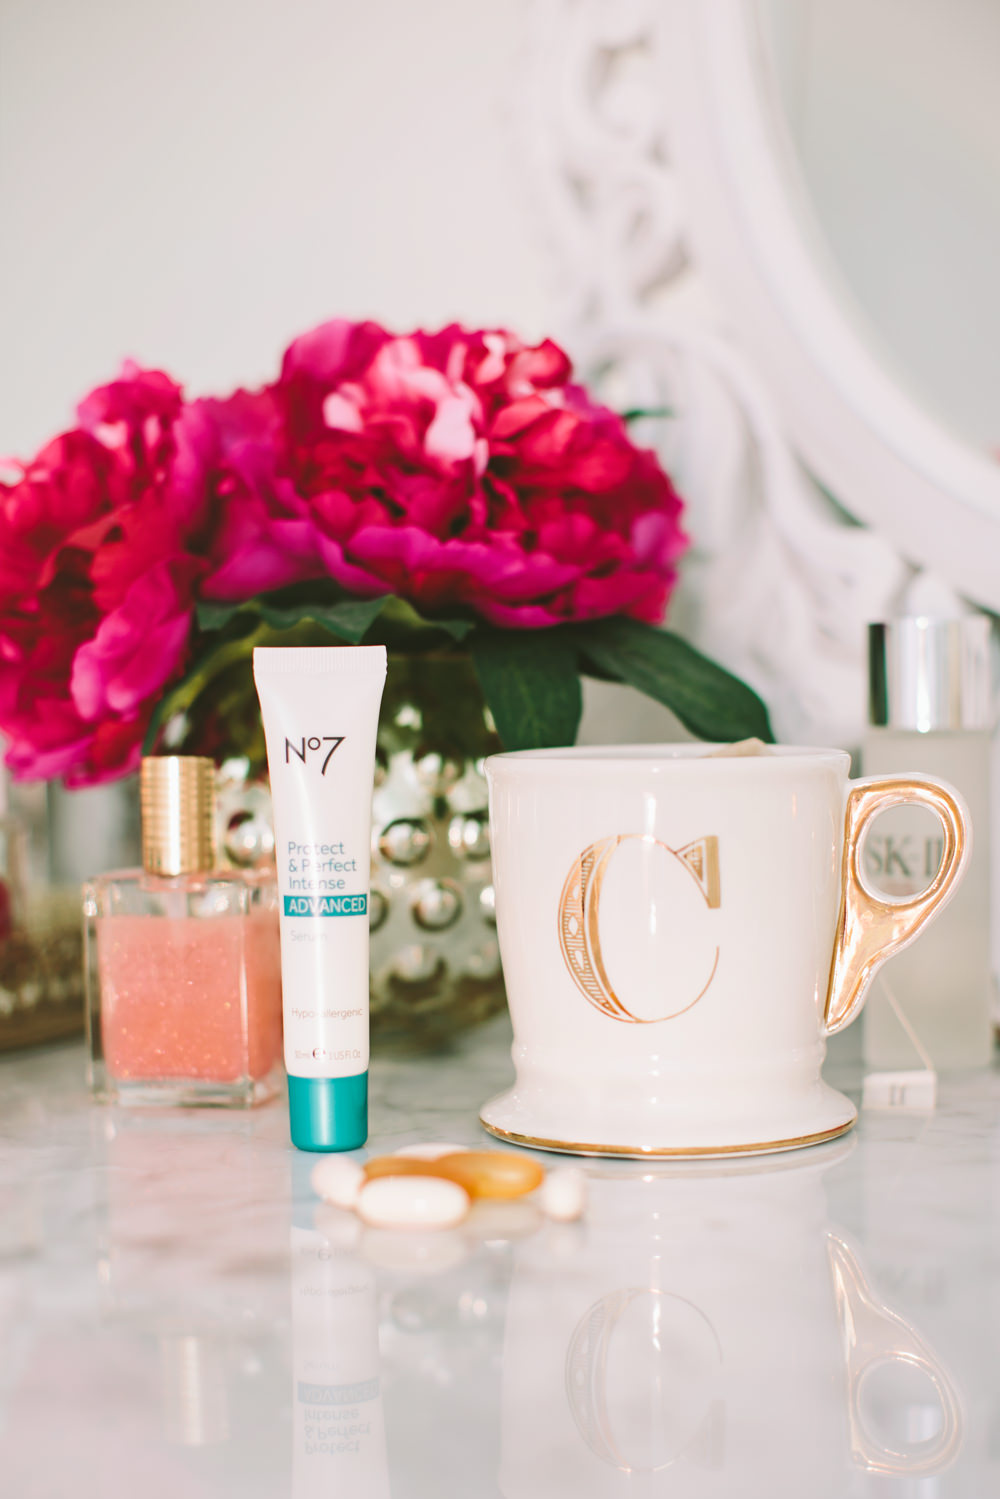 dash of darling shares her seven anti-aging skincare secrets.